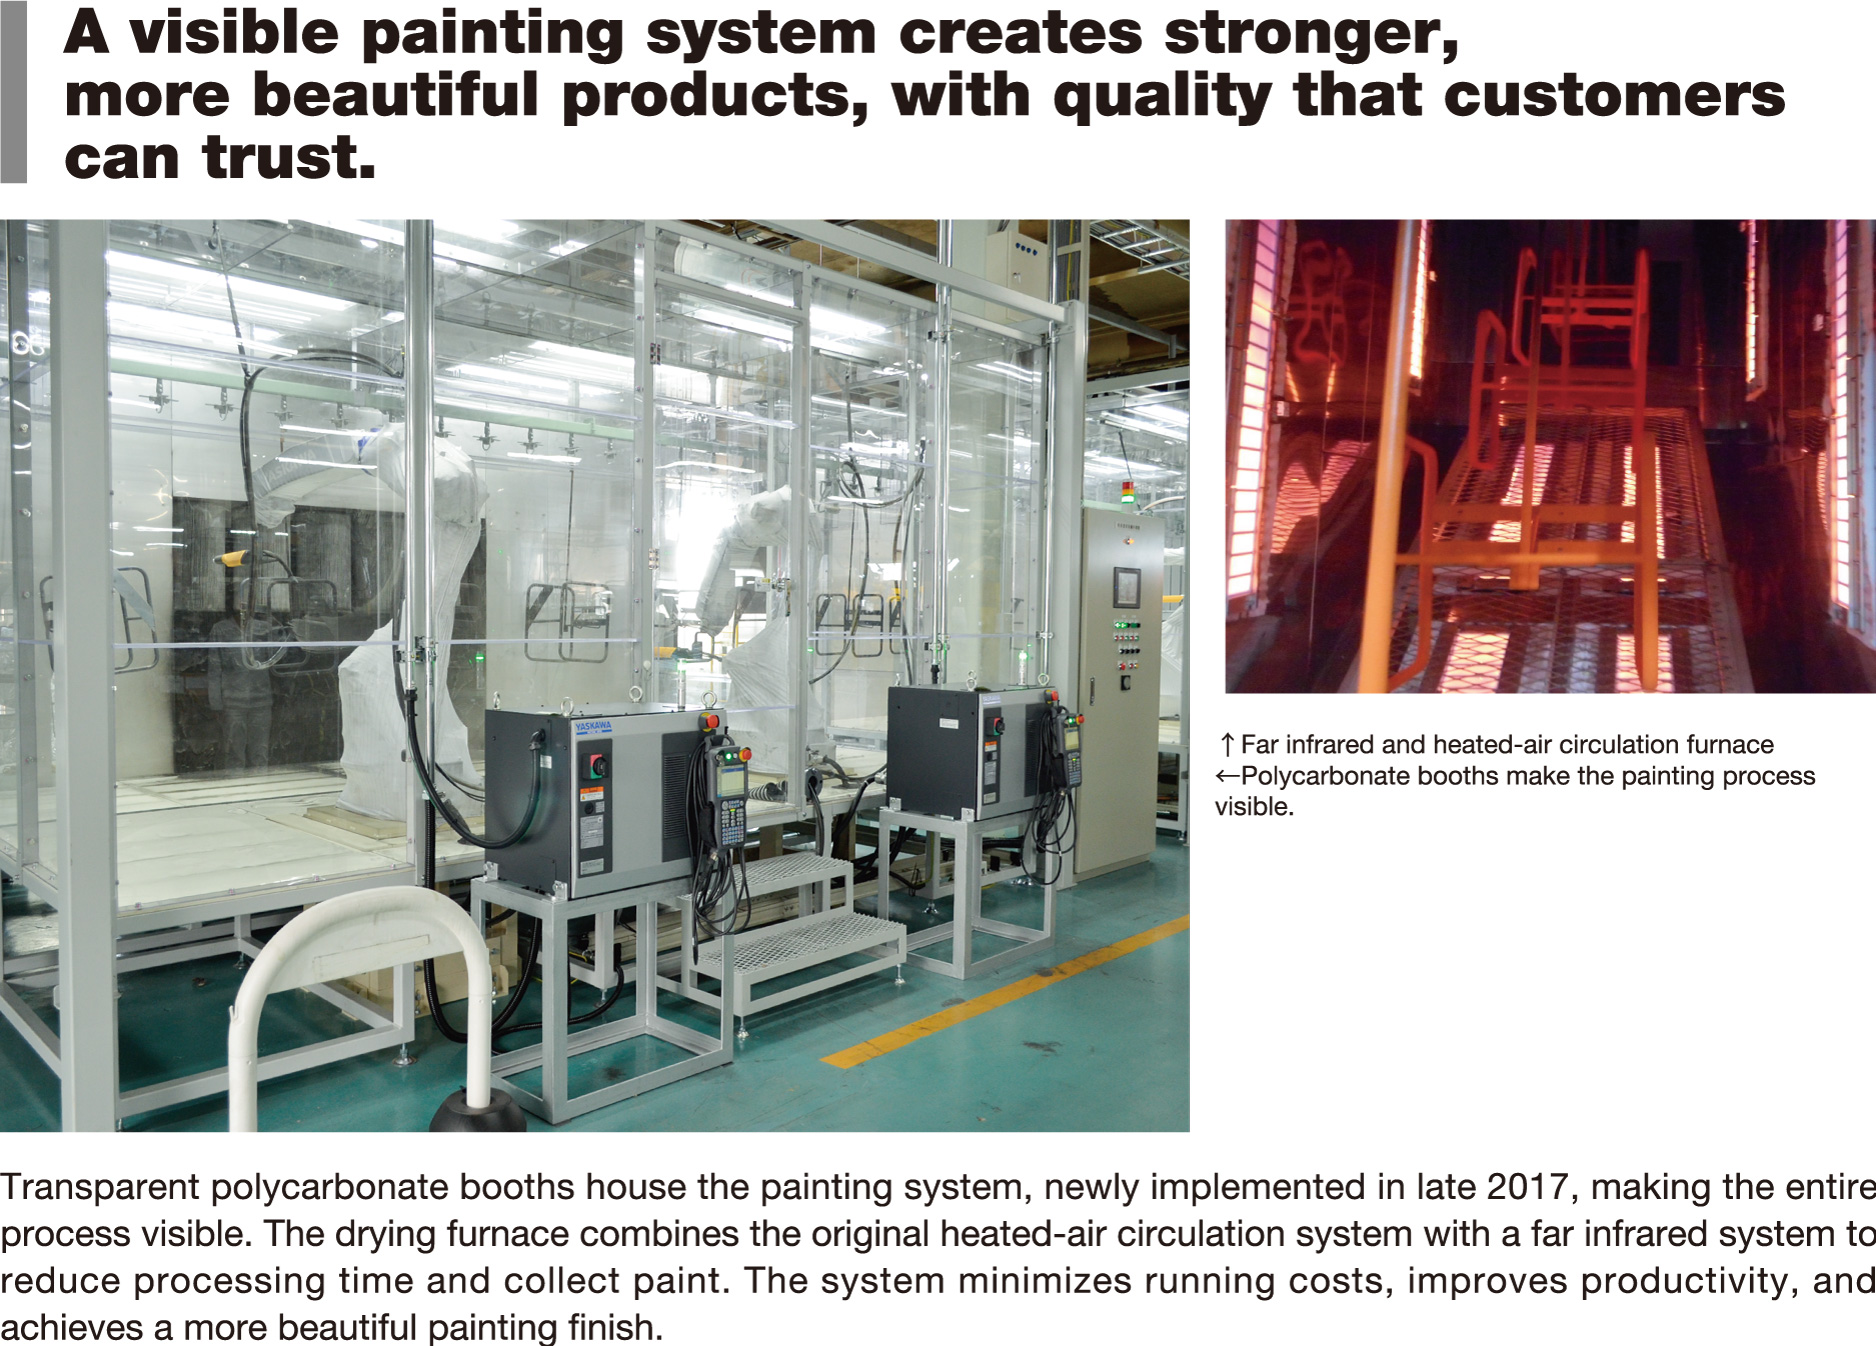 A visible painting system creates stronger, more beautiful products, with quality that customers can trust.